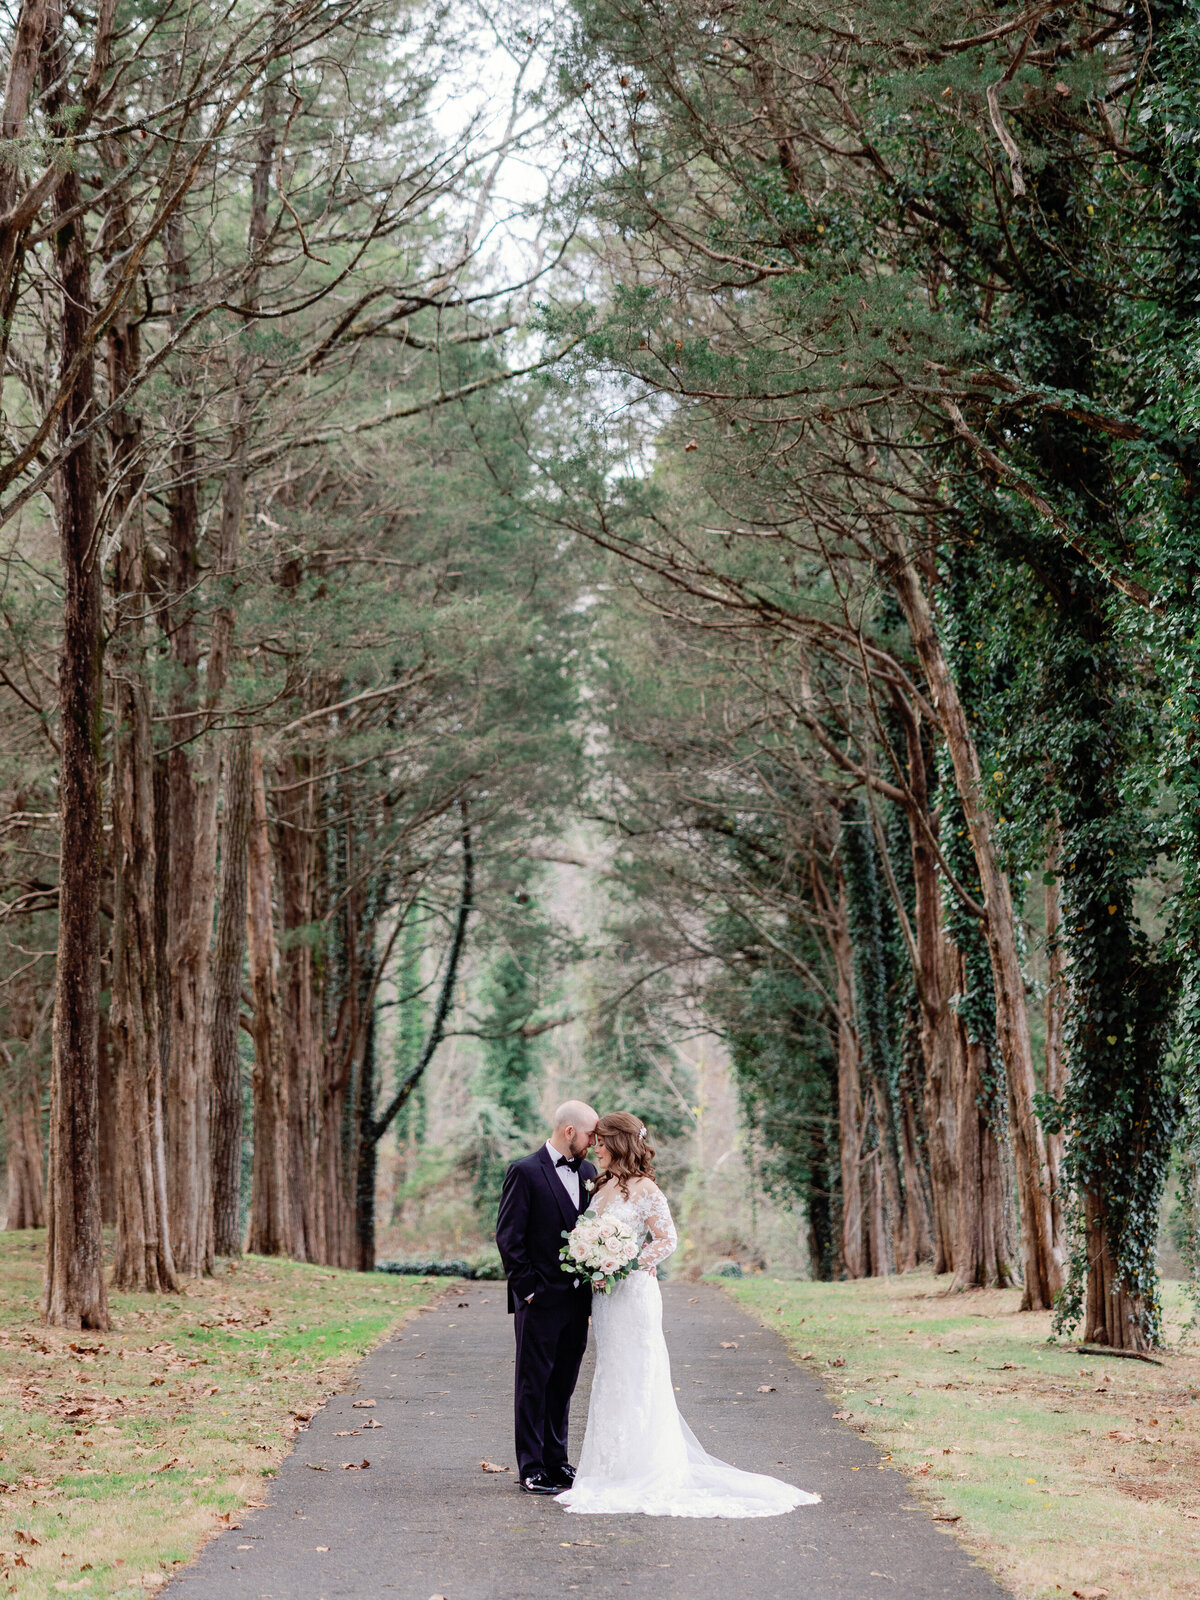 A bride and groom look lovingly at each other as they stand on a pathway underneath a parting of tall trees covered in green ivy